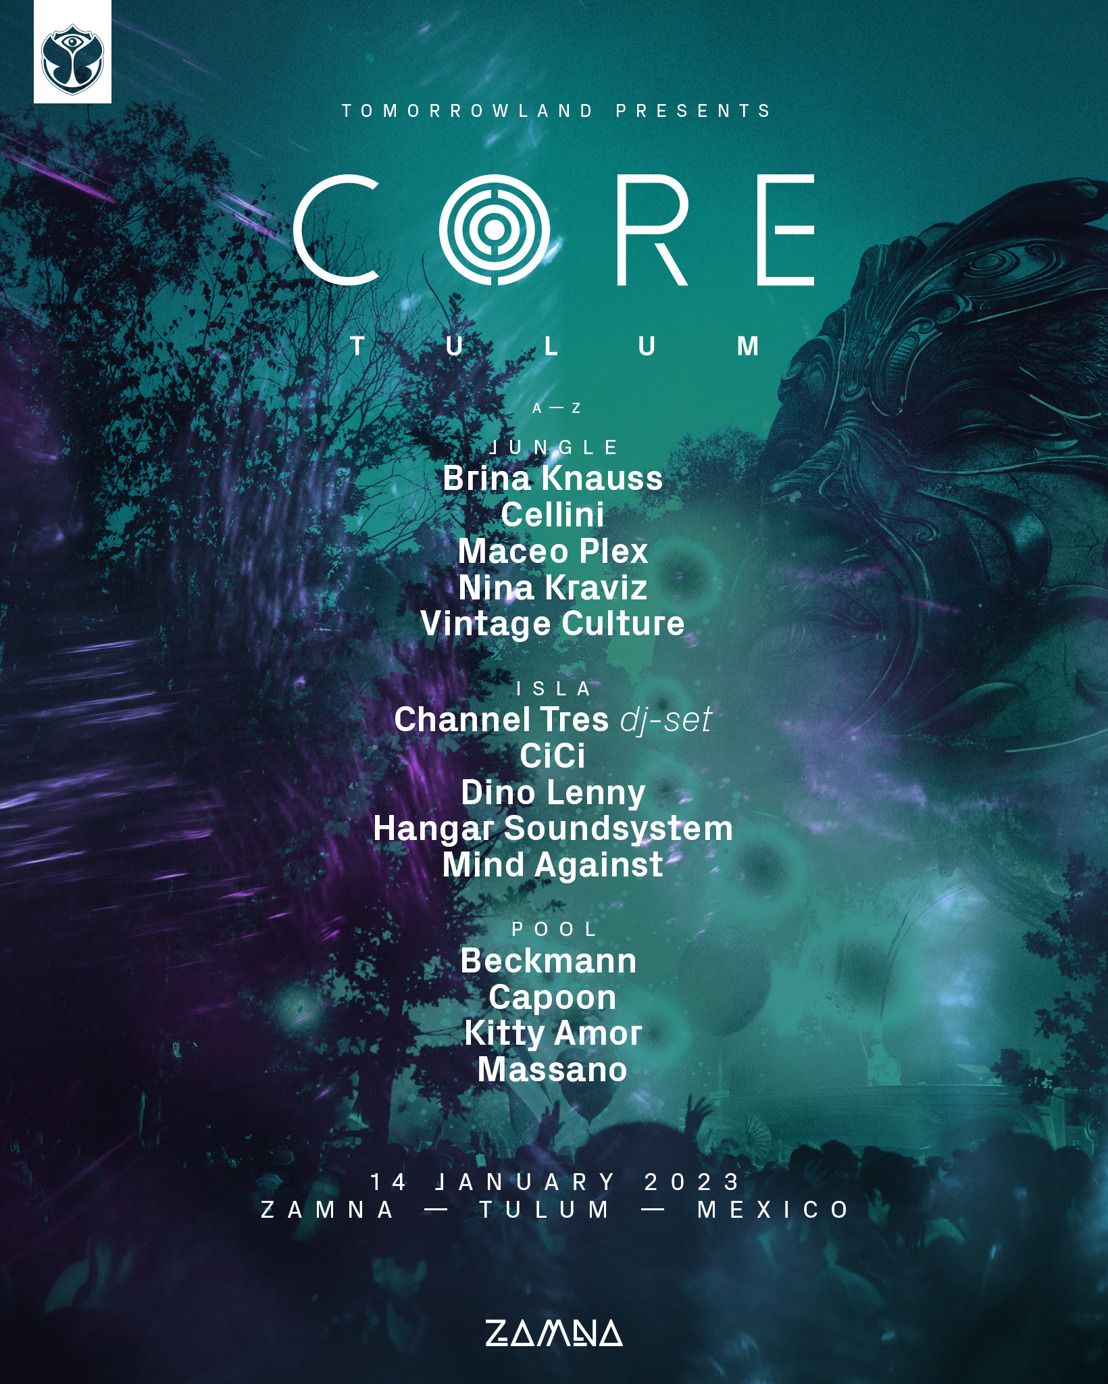 ‘Tomorrowland presents CORE Tulum’ adds Channel Tres (DJ set), Brina Knauss, Mind Against, CiCi, Dino Lenny, Massano, Capoon and Kitty Amor to the line-up